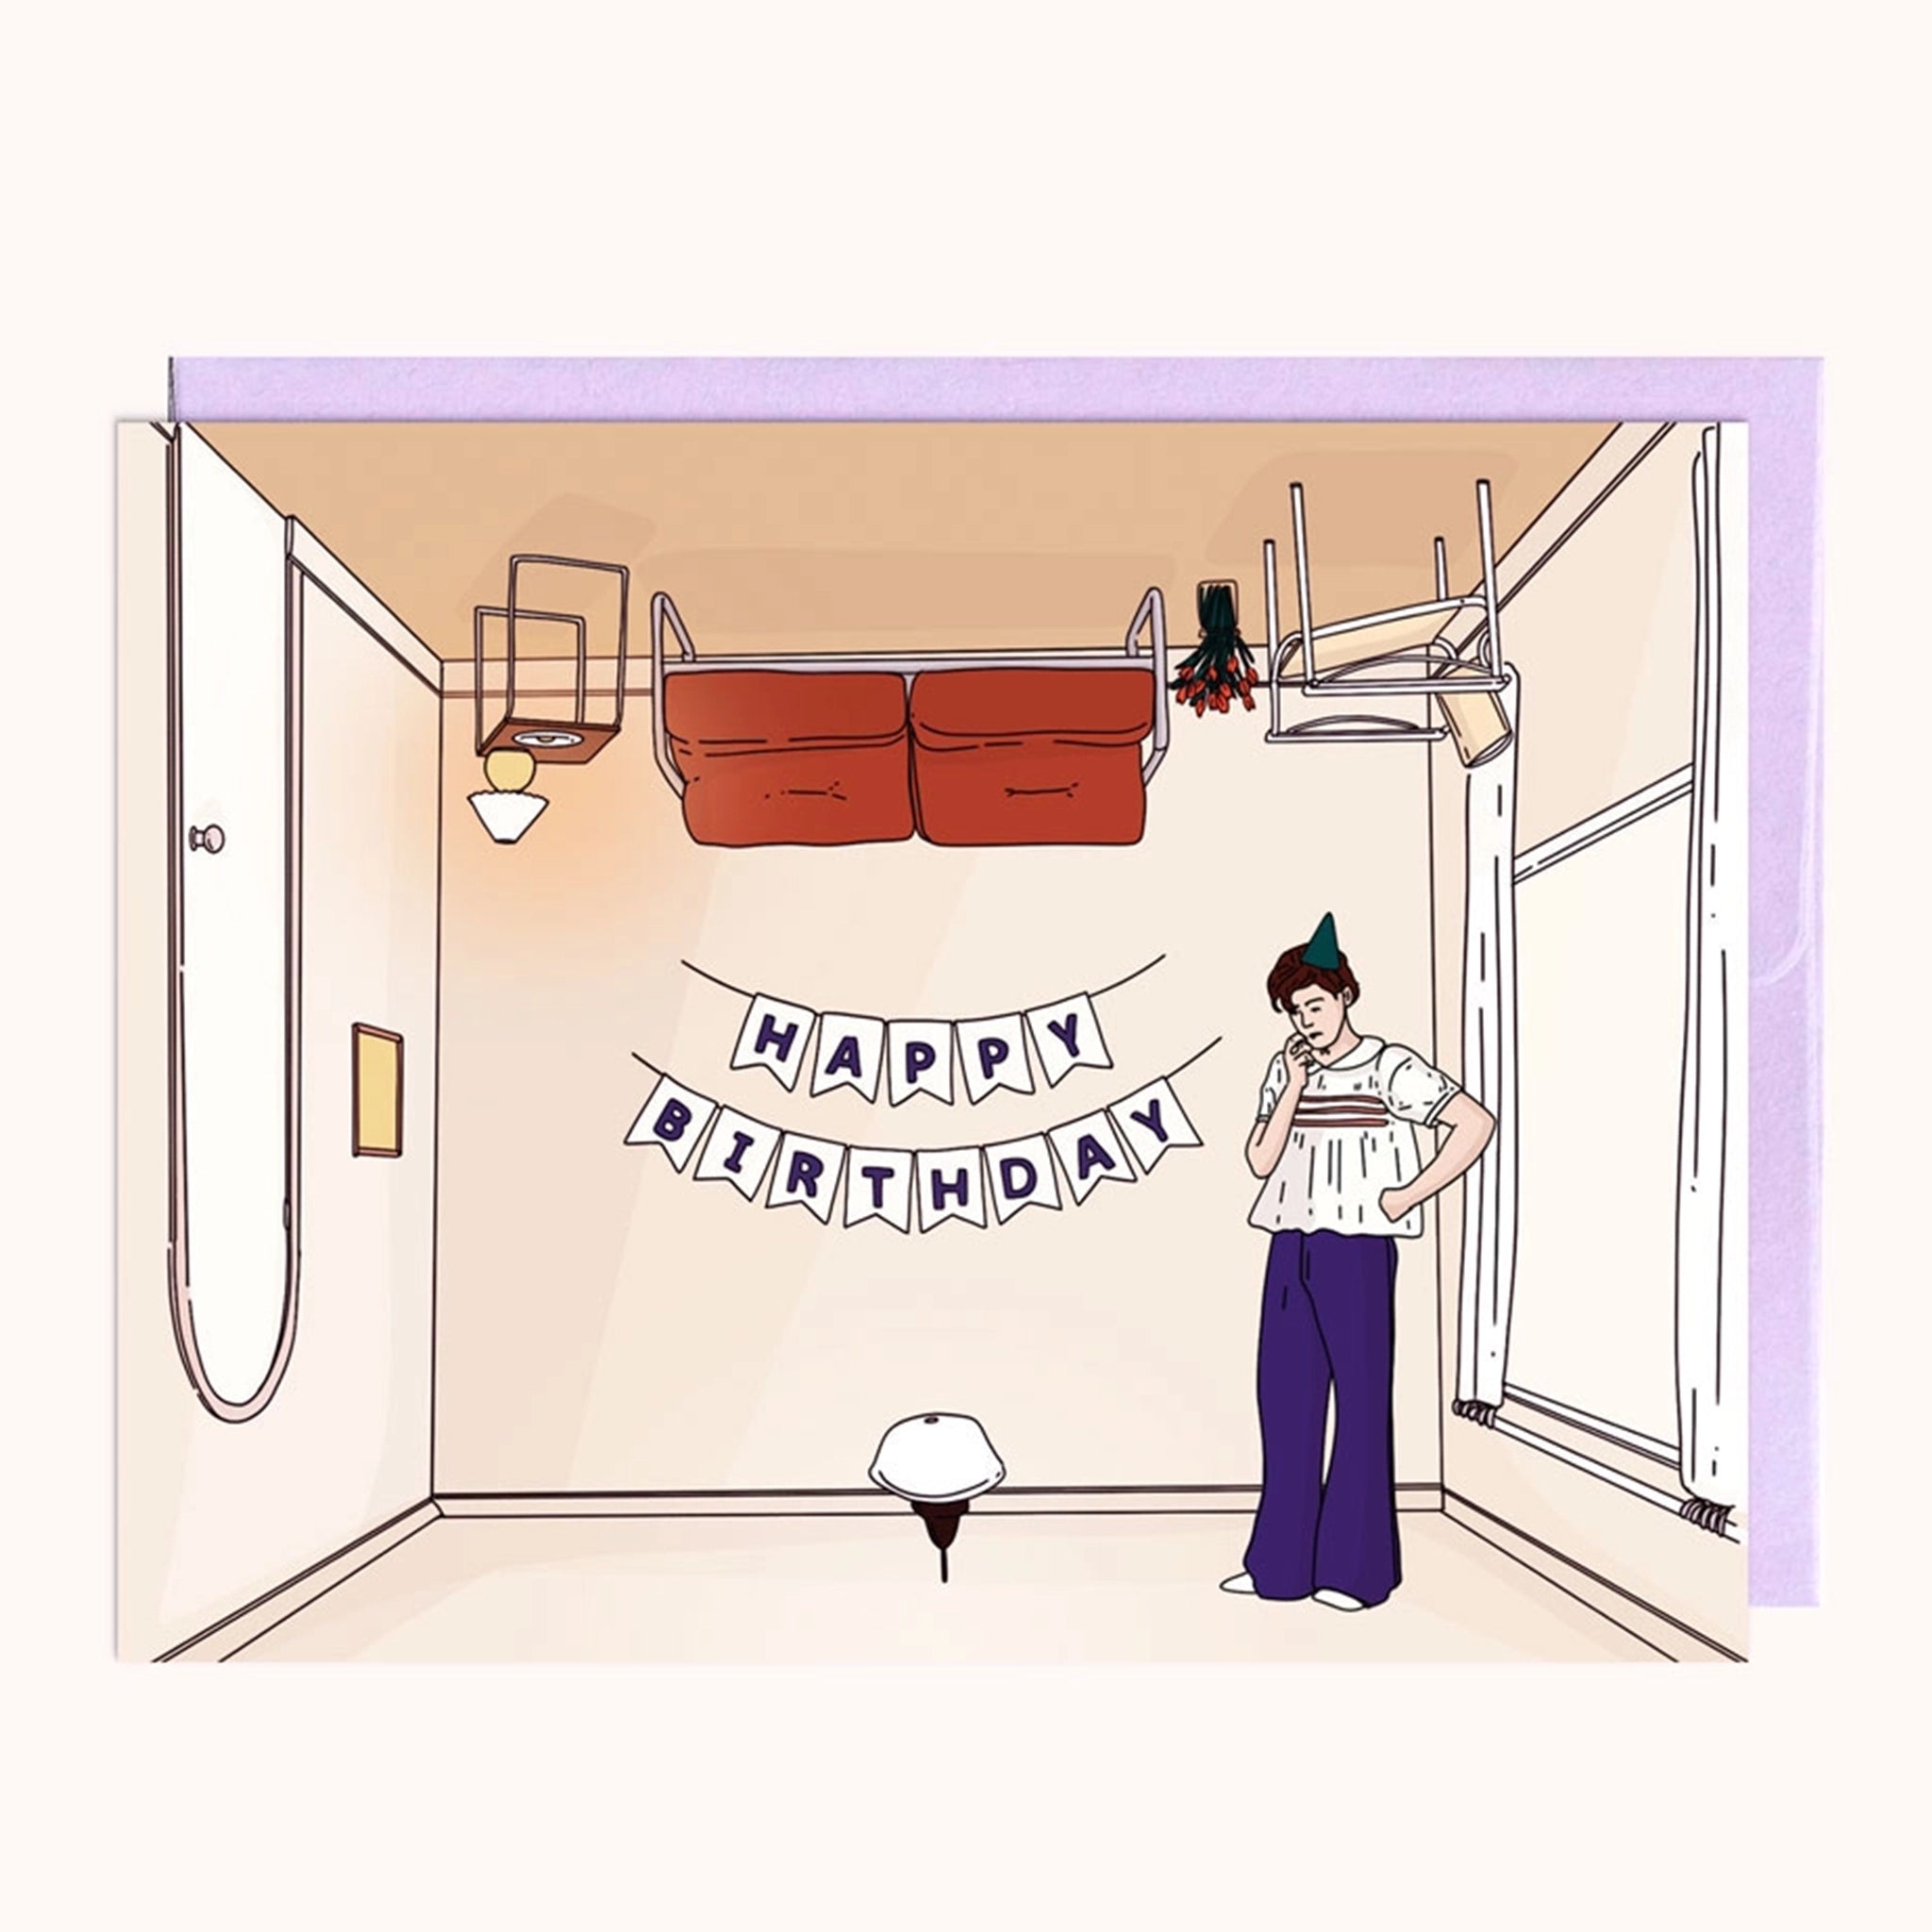 On a white background is a neutral card with an illustration of Harry Styles album cover art featuring him standing in an upside down room with a happy birthday banner on the wall. 